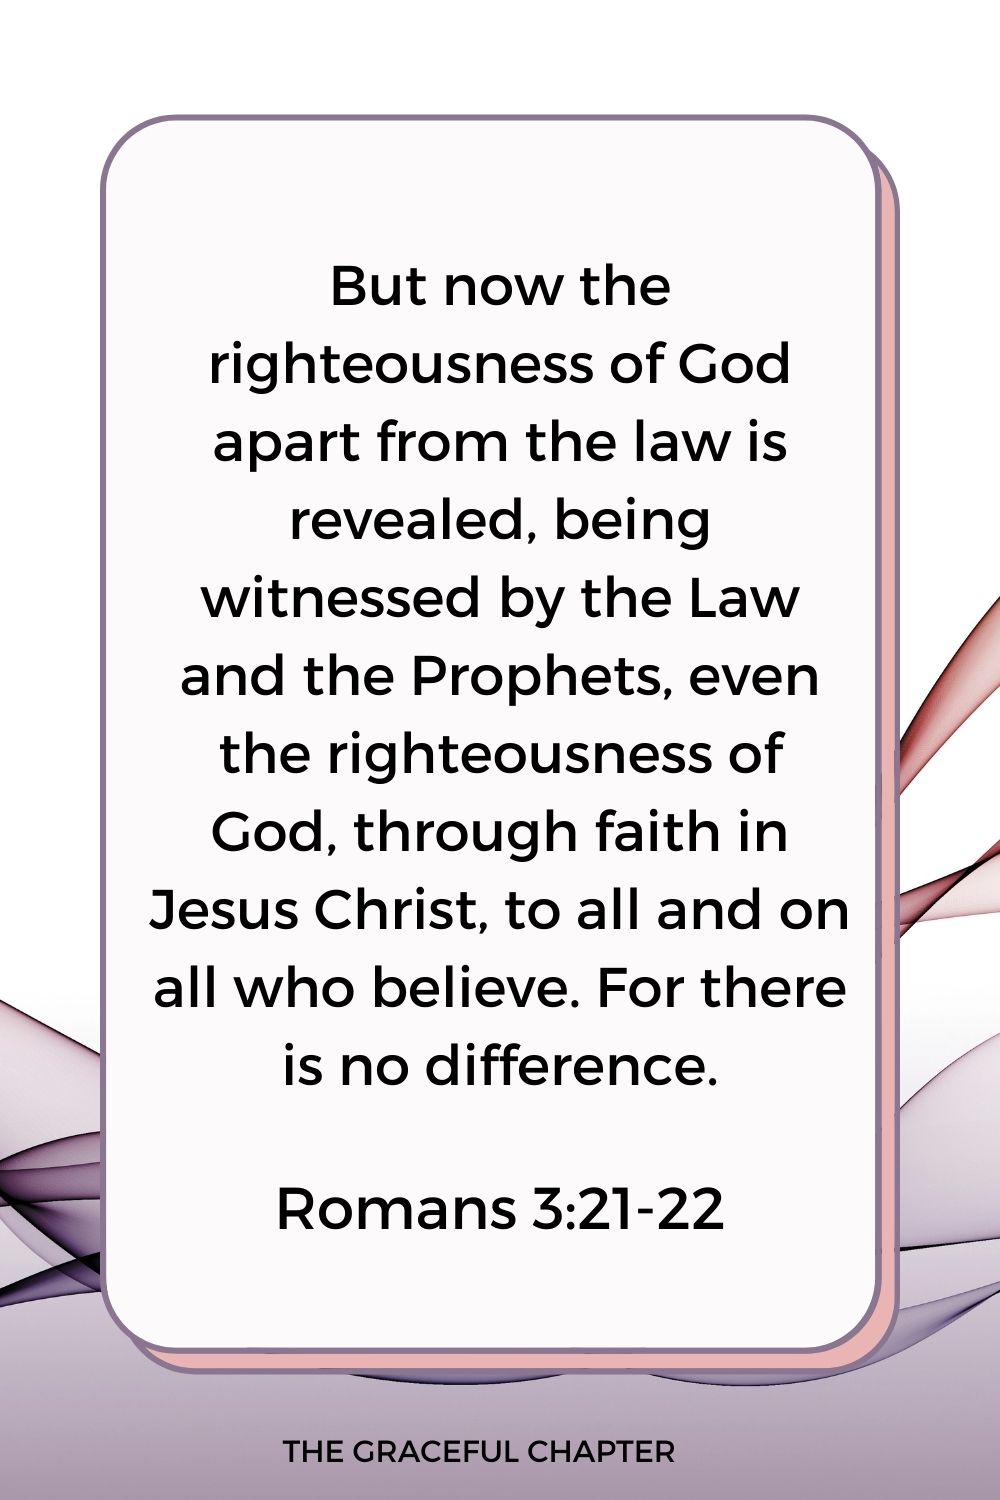 But now the righteousness of God apart from the law is revealed, being witnessed by the Law and the Prophets, even the righteousness of God, through faith in Jesus Christ, to all and on all who believe. For there is no difference. Romans 3:21-22